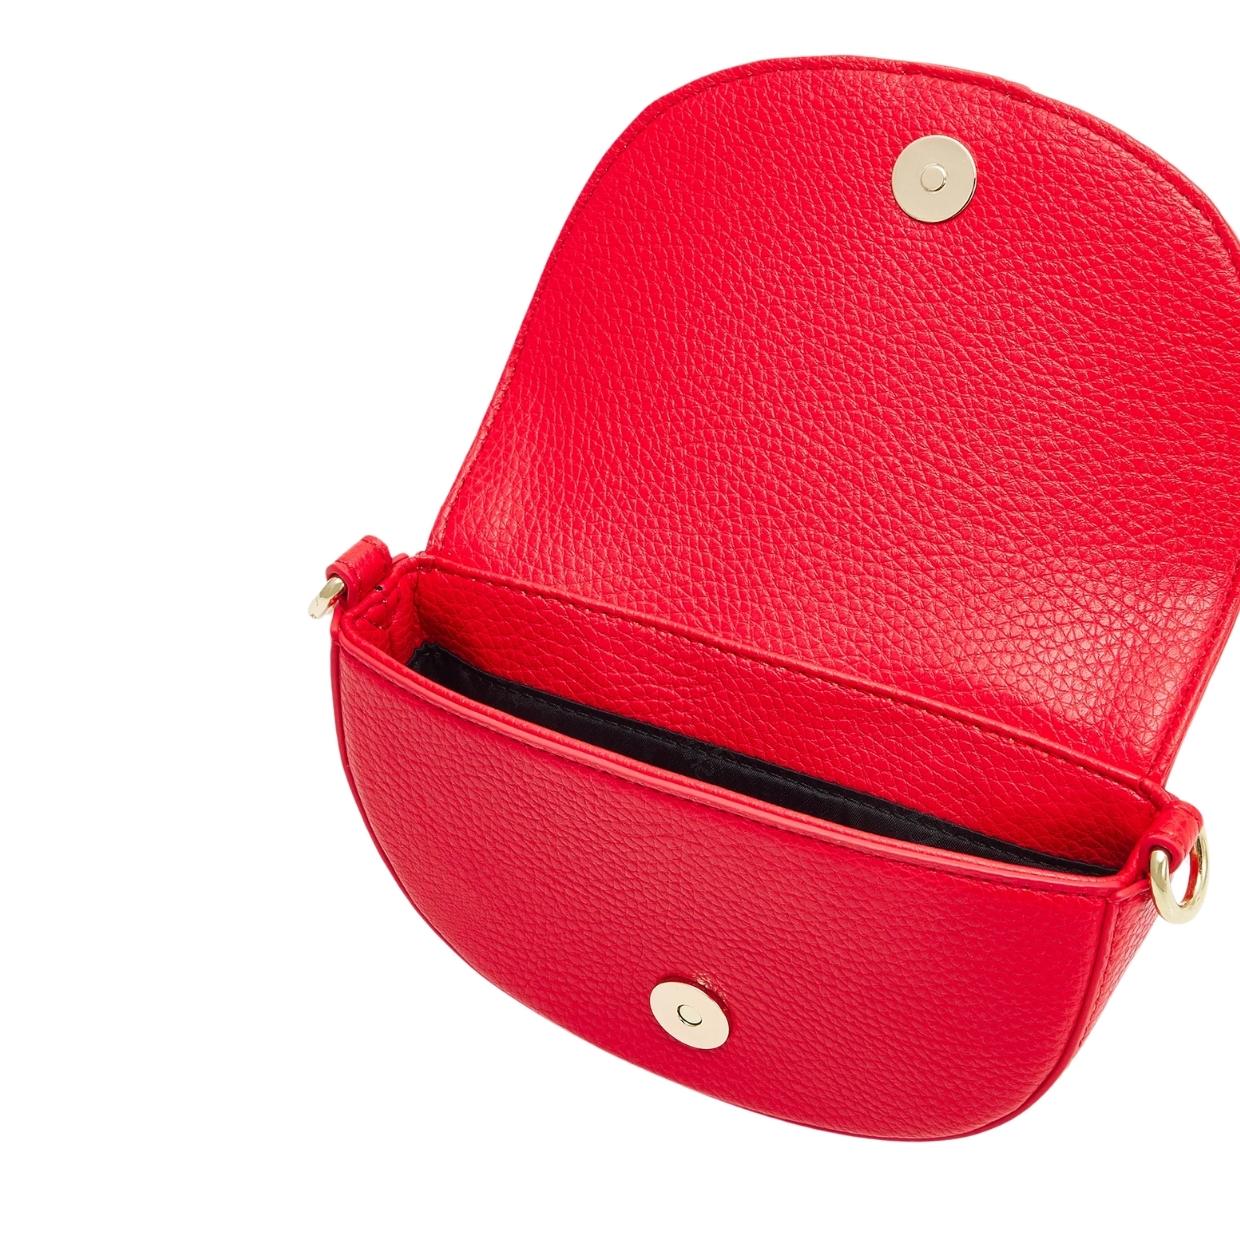 Versace Jeans Couture Buckle Mini Red Shoulder Bag